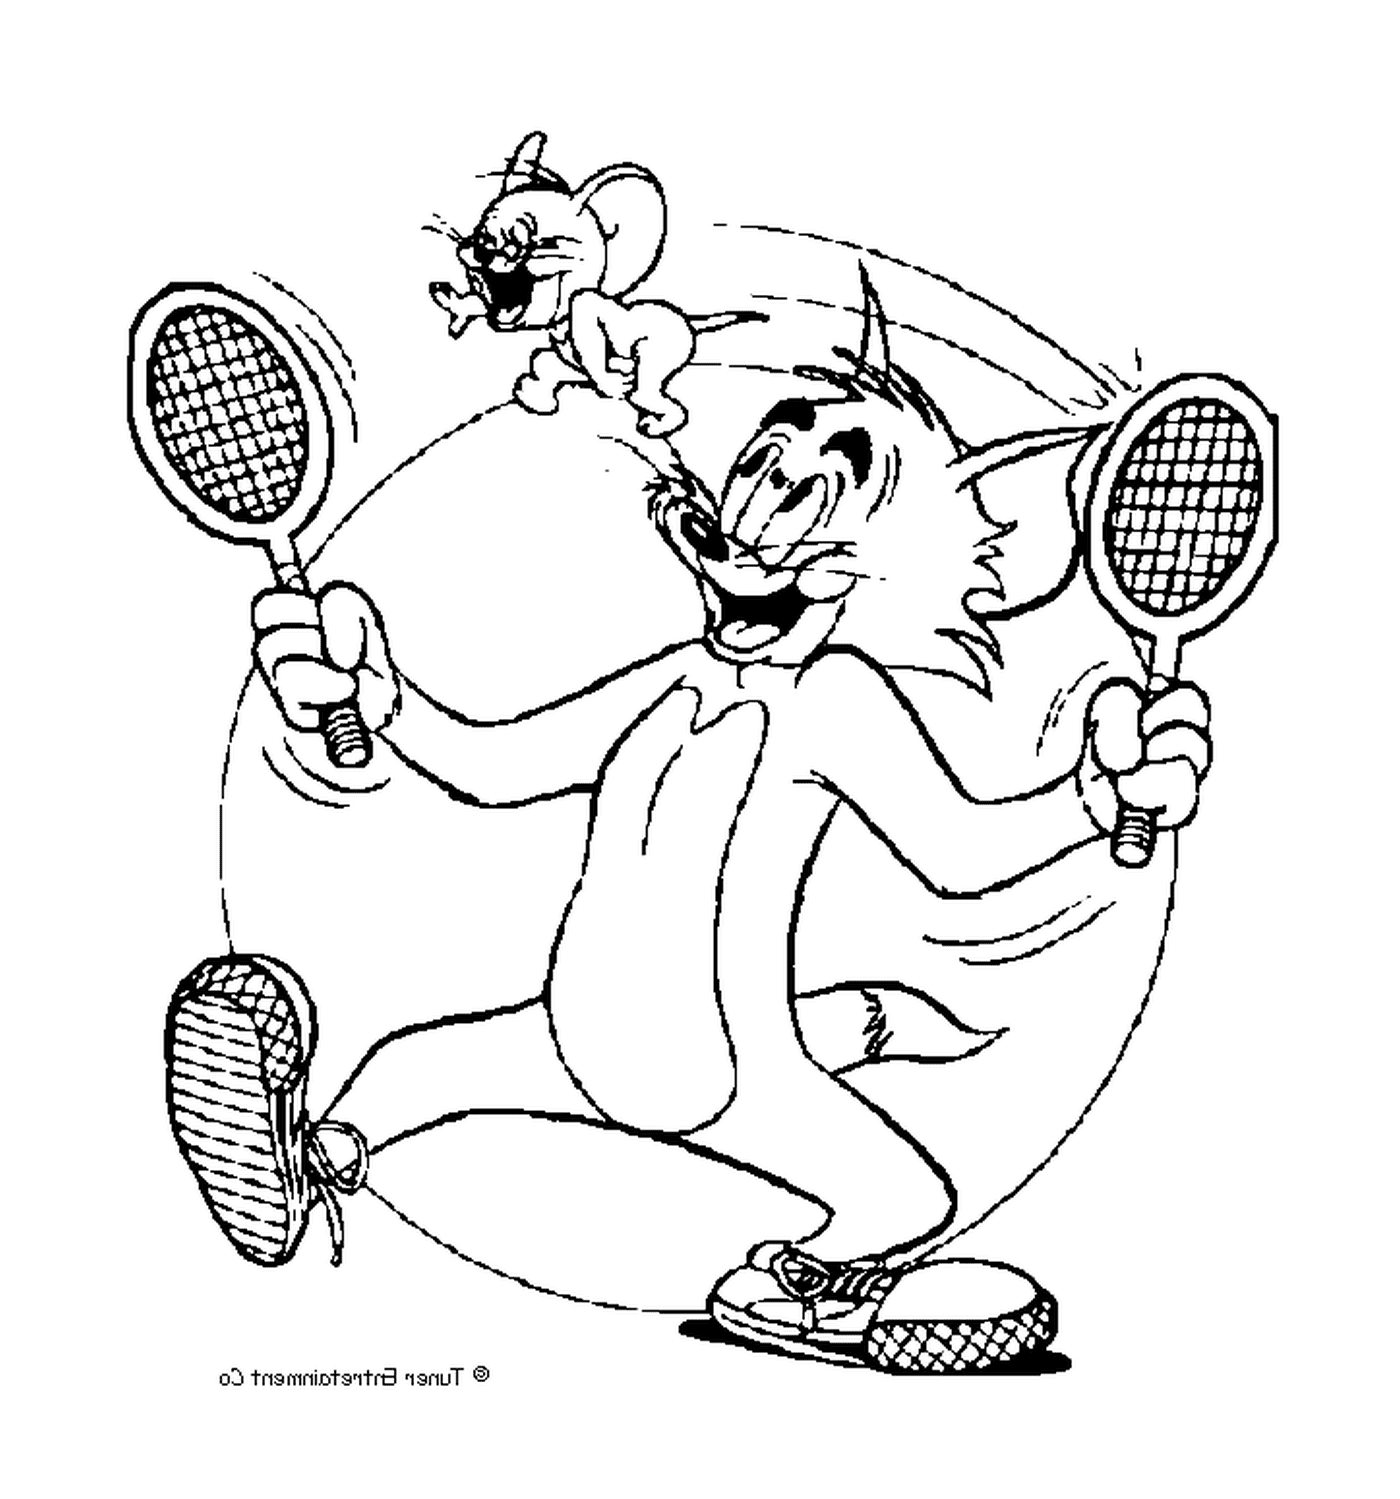  Tom plays tennis with Jerry 